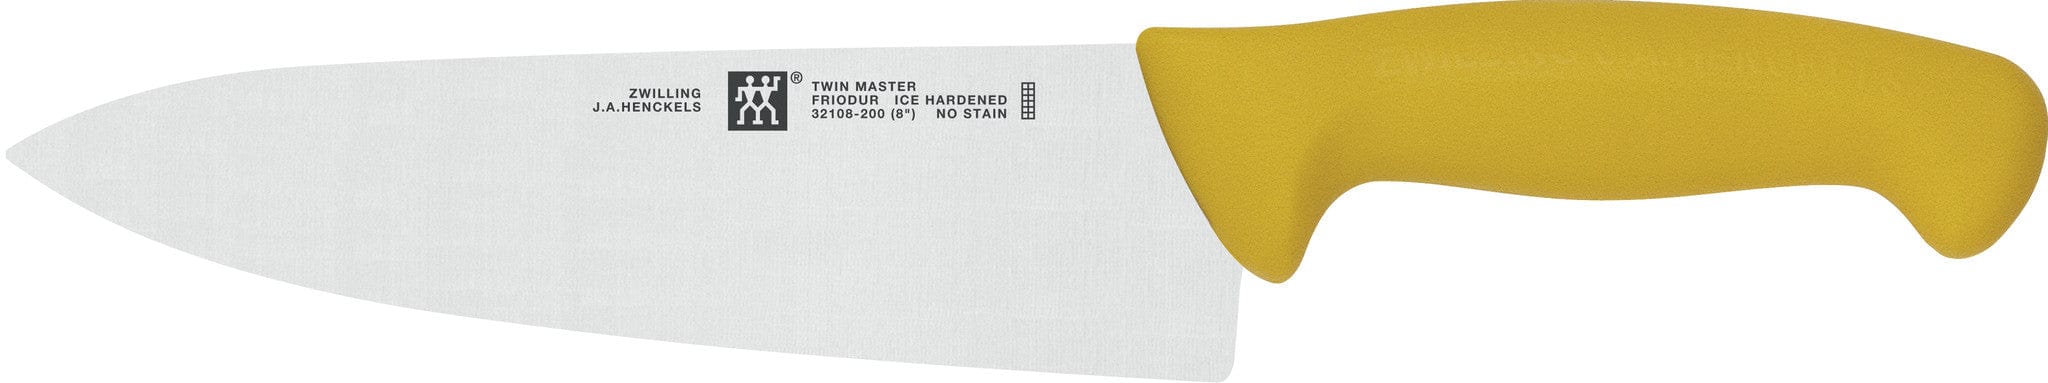 TWIN Master CHEF'S KNIFE 8" / 200 mm 32108-200